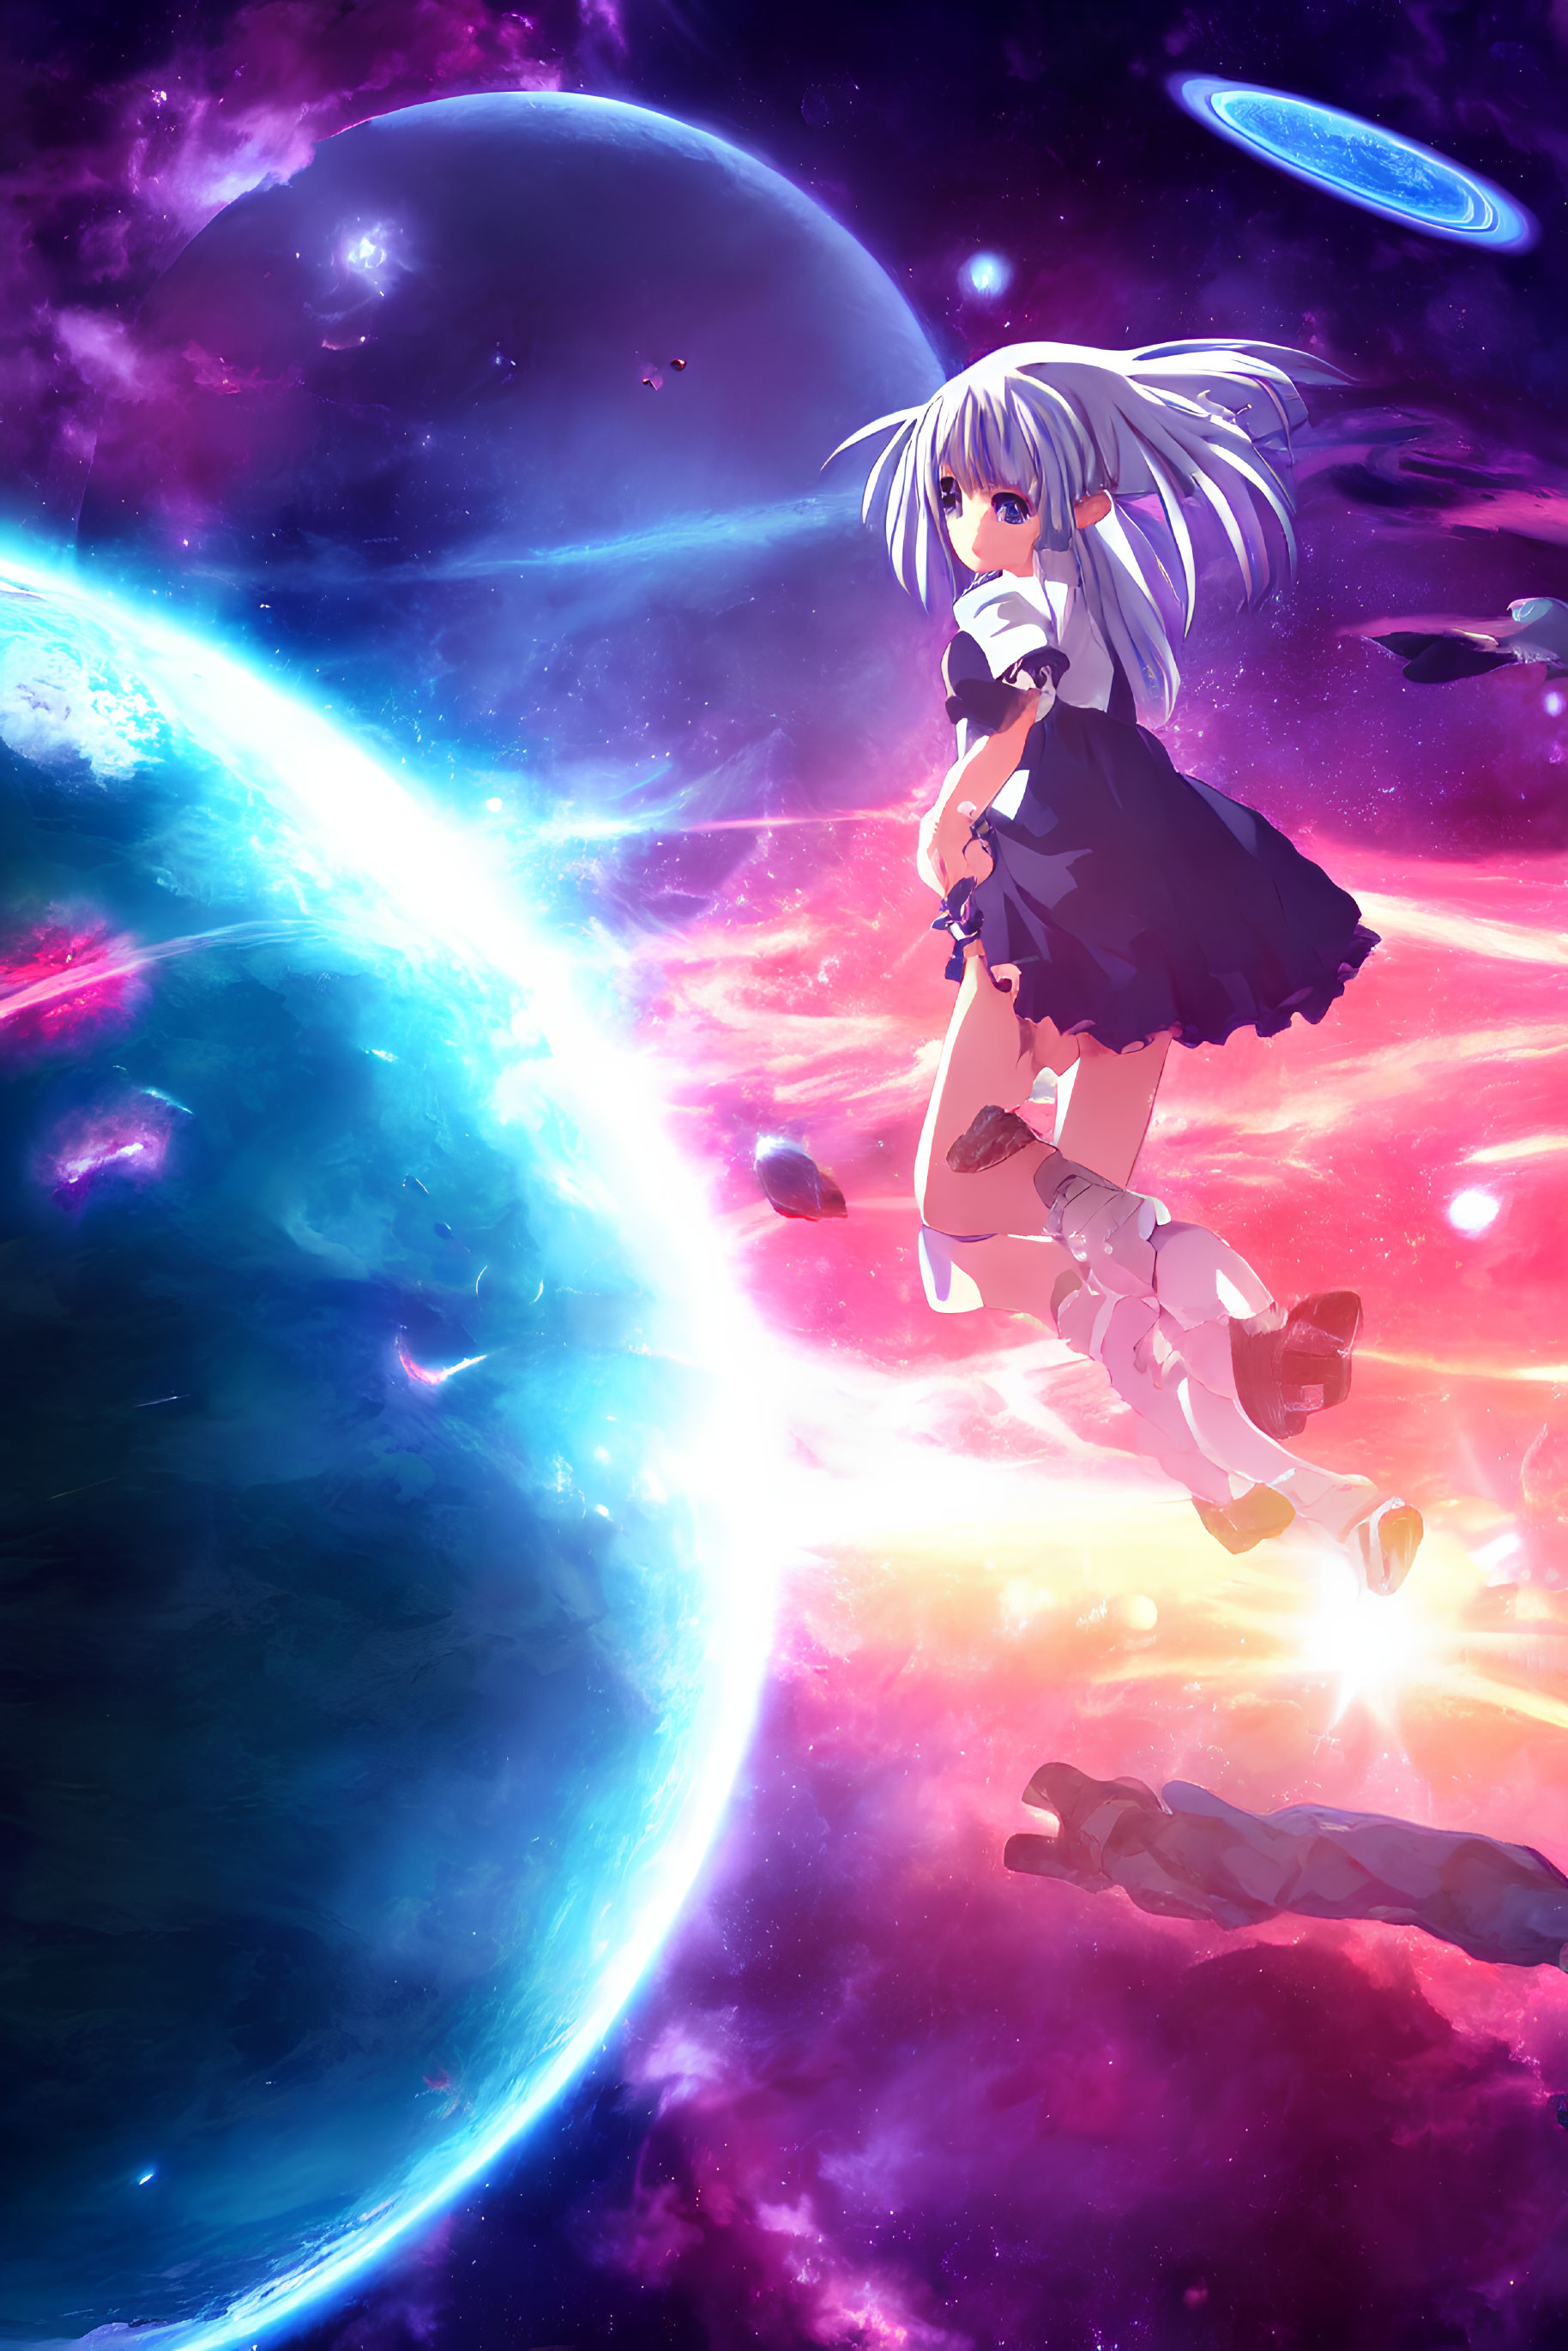 Silver-haired anime-style girl floating in space with vibrant planets and stars.